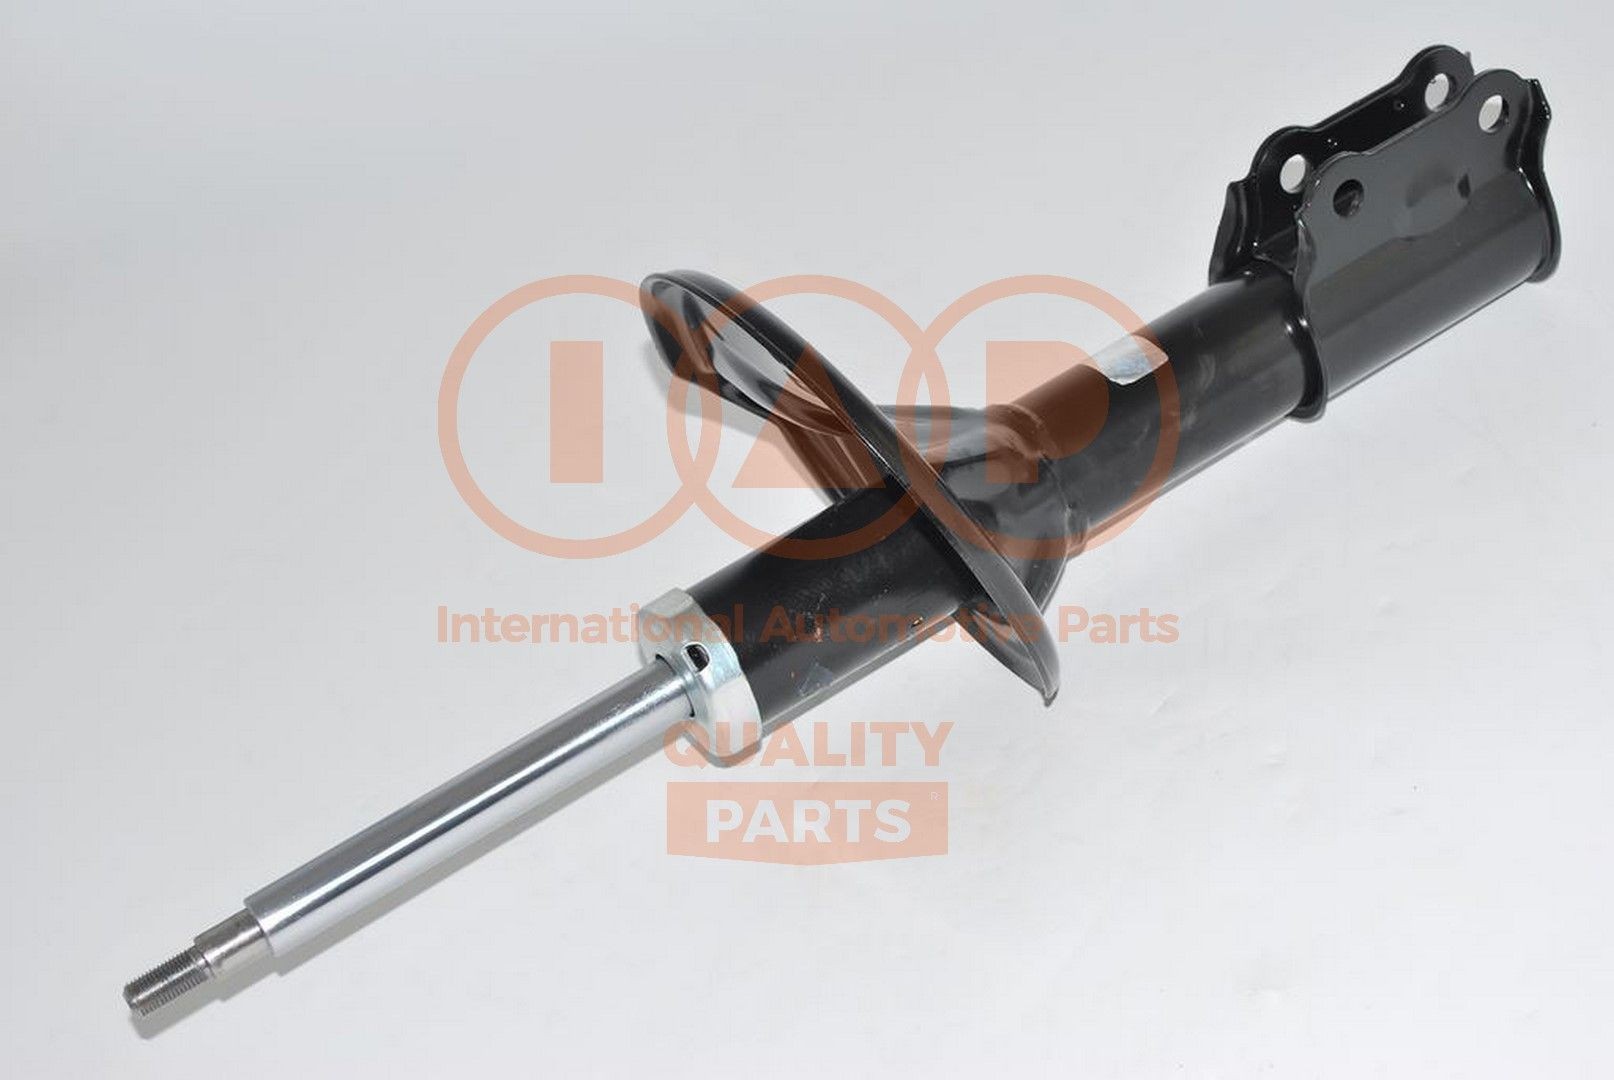 IAP QUALITY PARTS 504-07022A Shock absorber 54650-28011